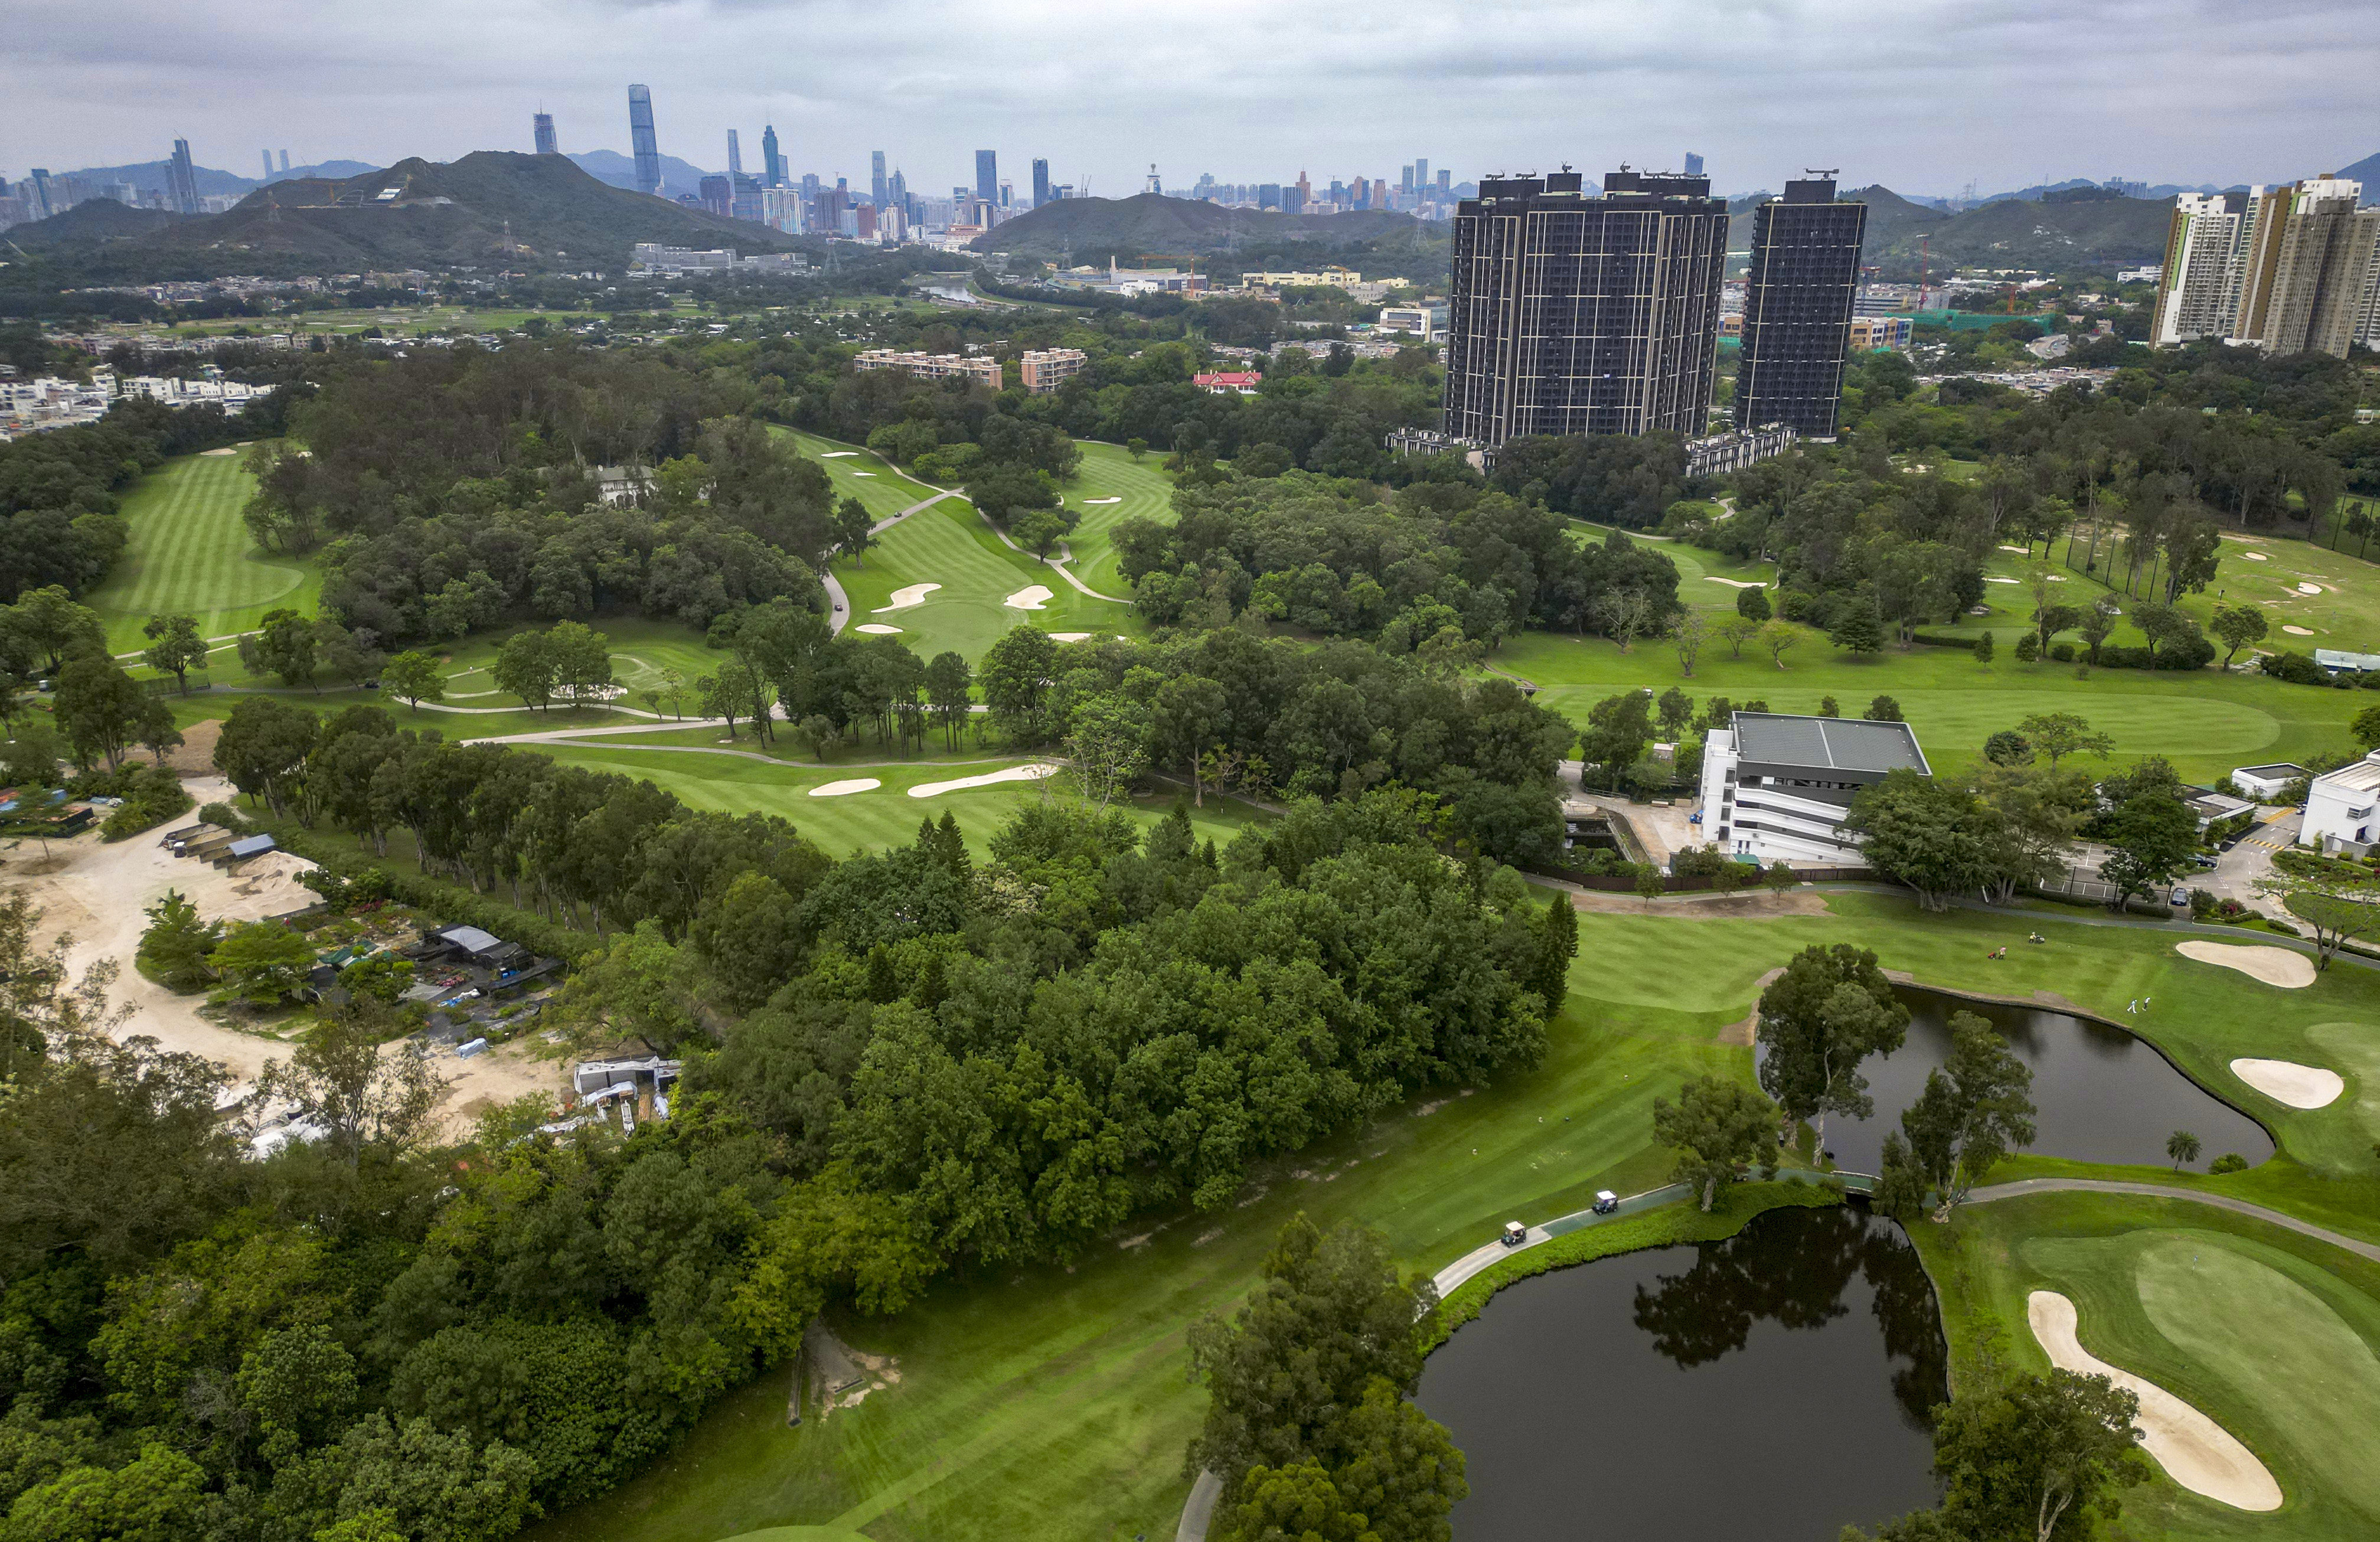 Hong Kong Golf Club in Fanling, part of which has been earmarked for new public housing. Photo: May Tse